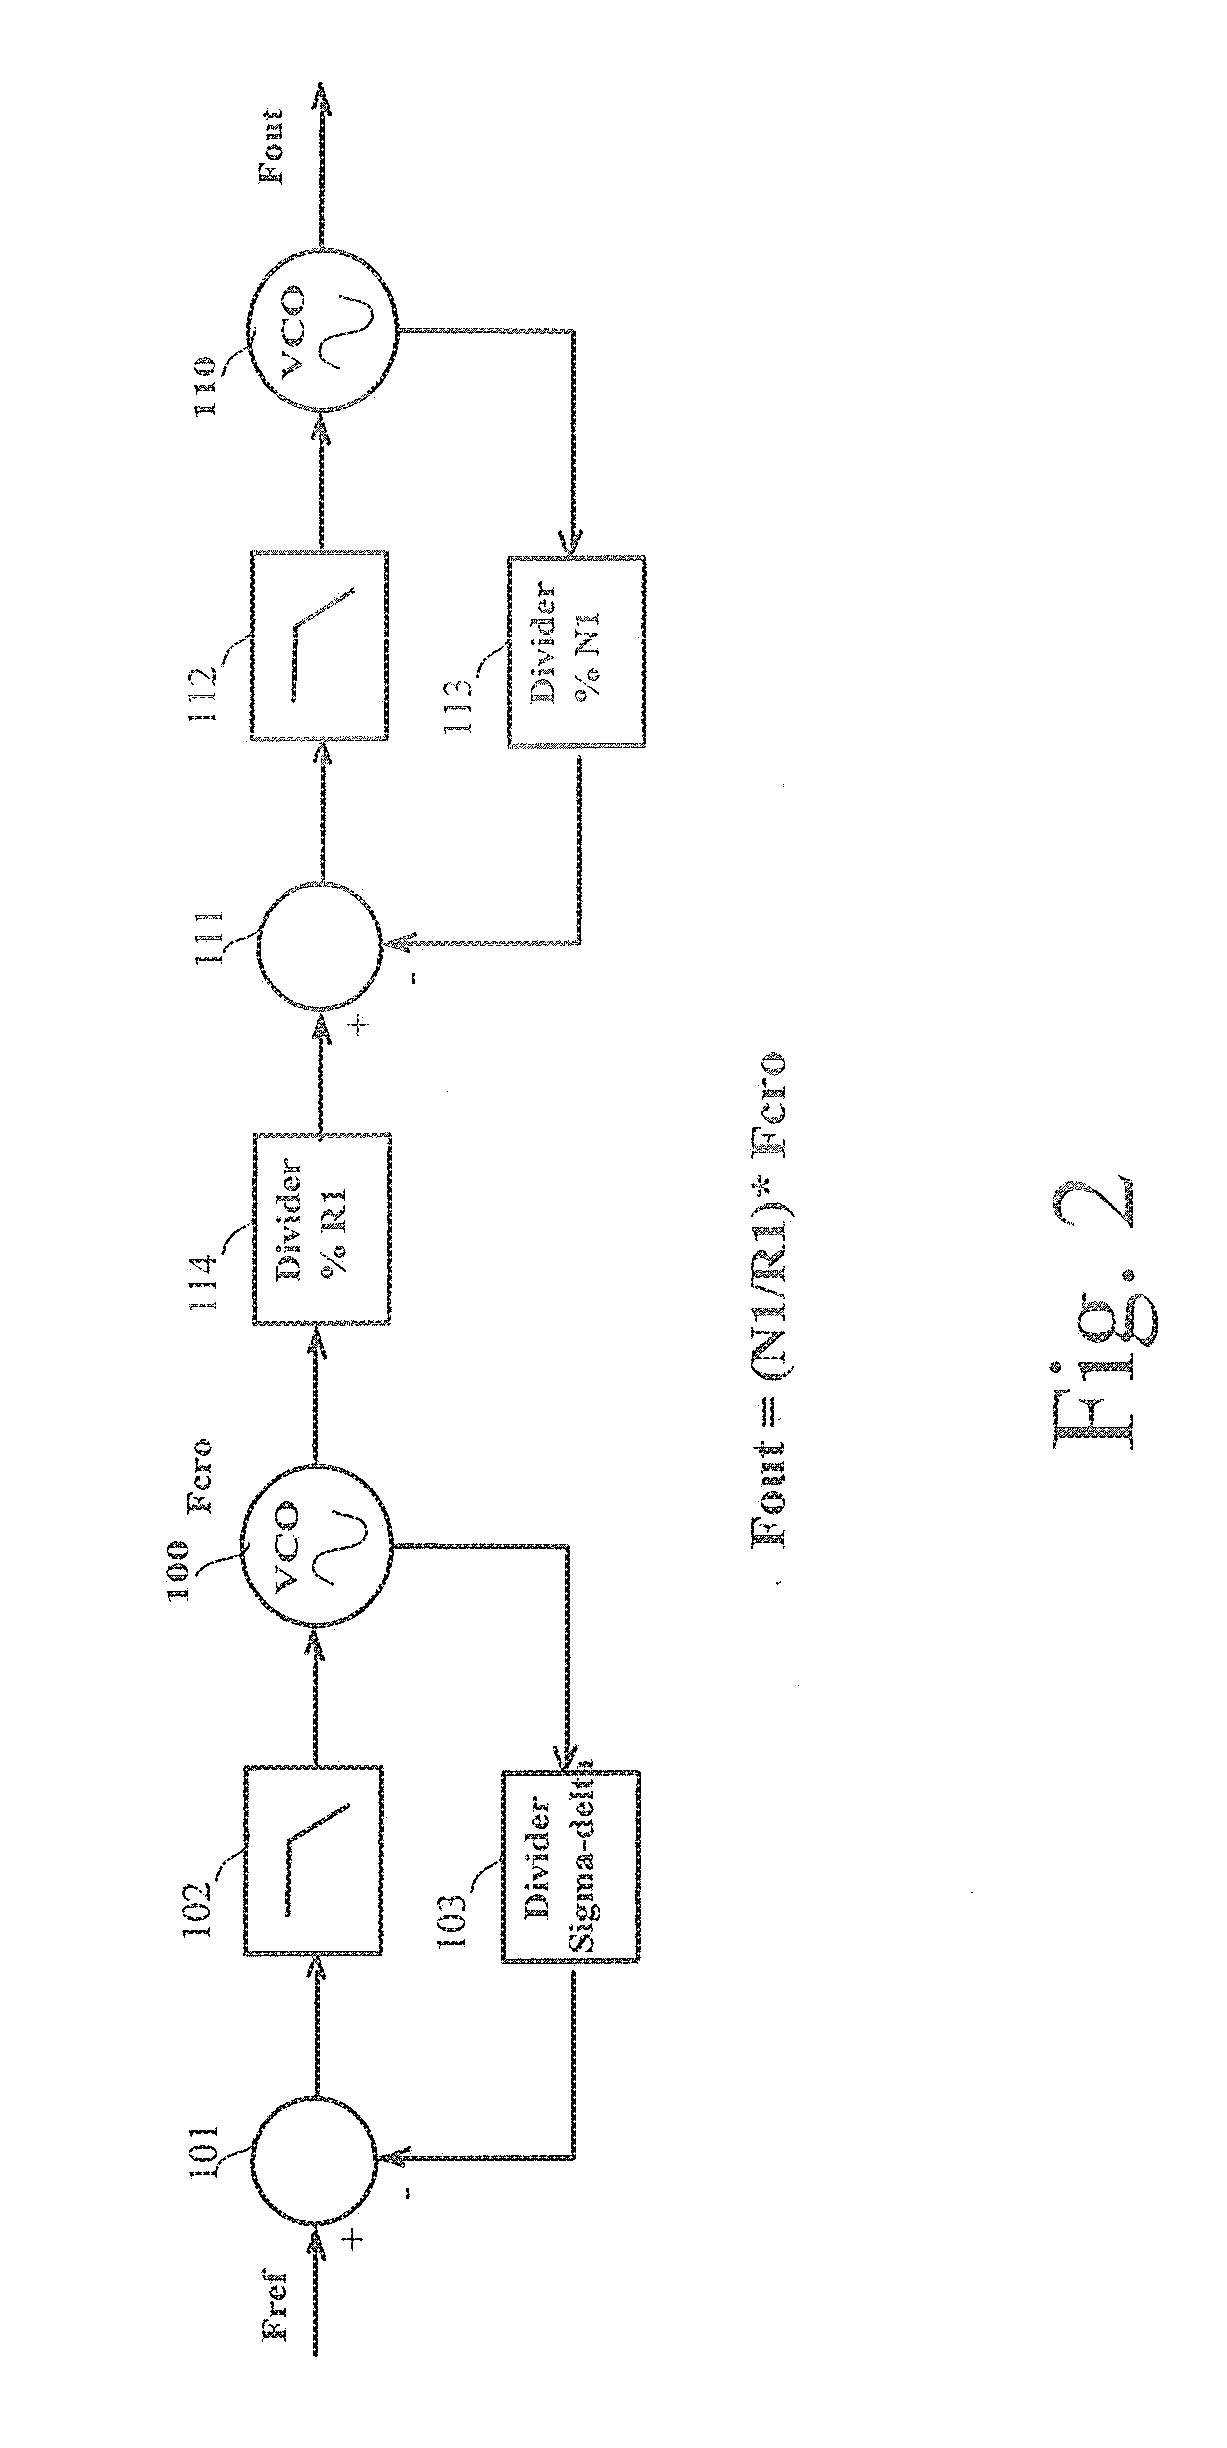 Multi-loop pll structure for generating an accurate and stable frequency over a wide range of frequencies